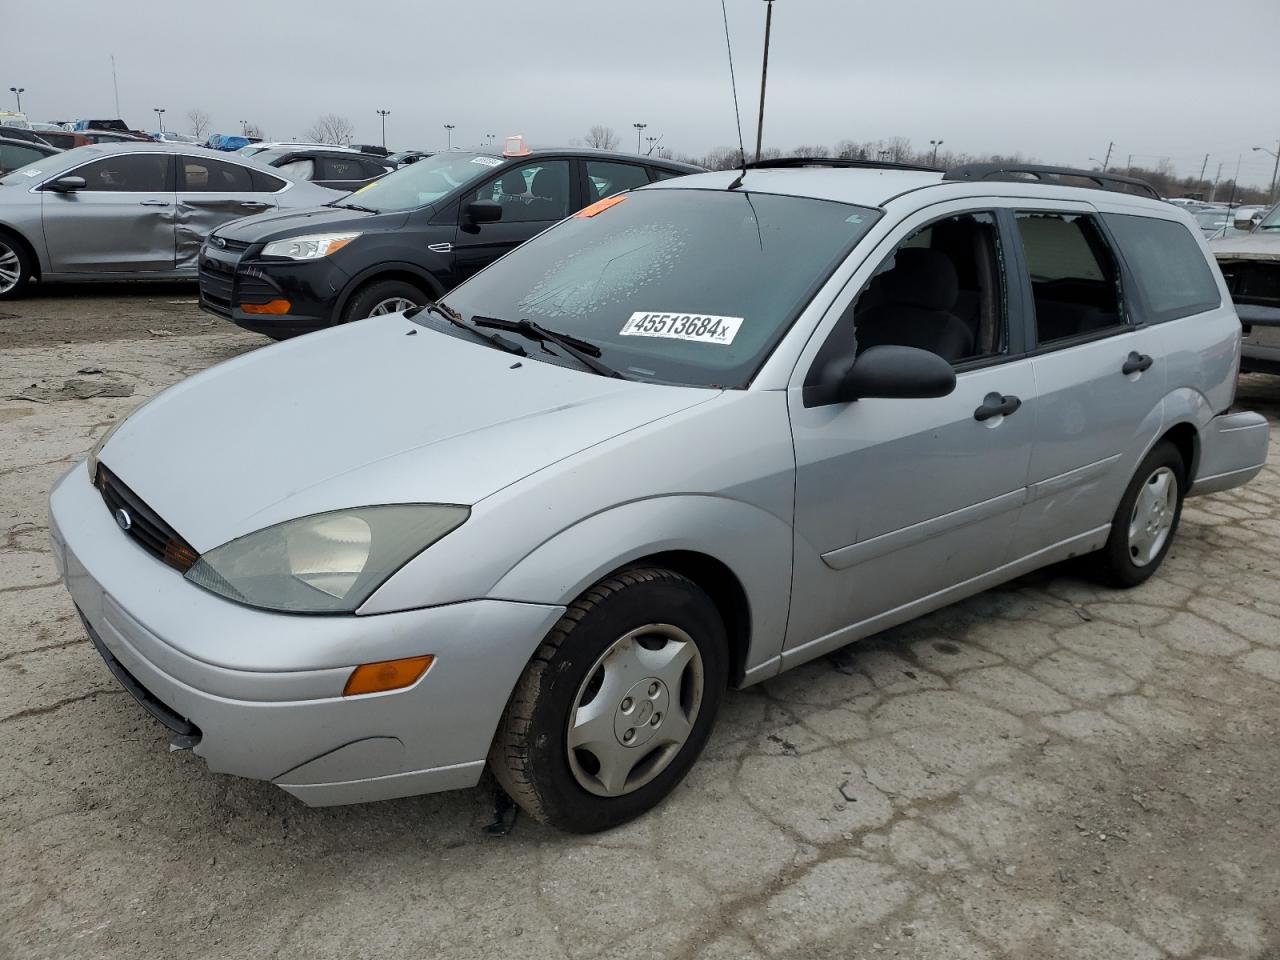 vin: 1FAFP36374W146574 1FAFP36374W146574 2004 ford focus 2000 for Sale in 46254 2452, In - Indianapolis, Indianapolis, USA